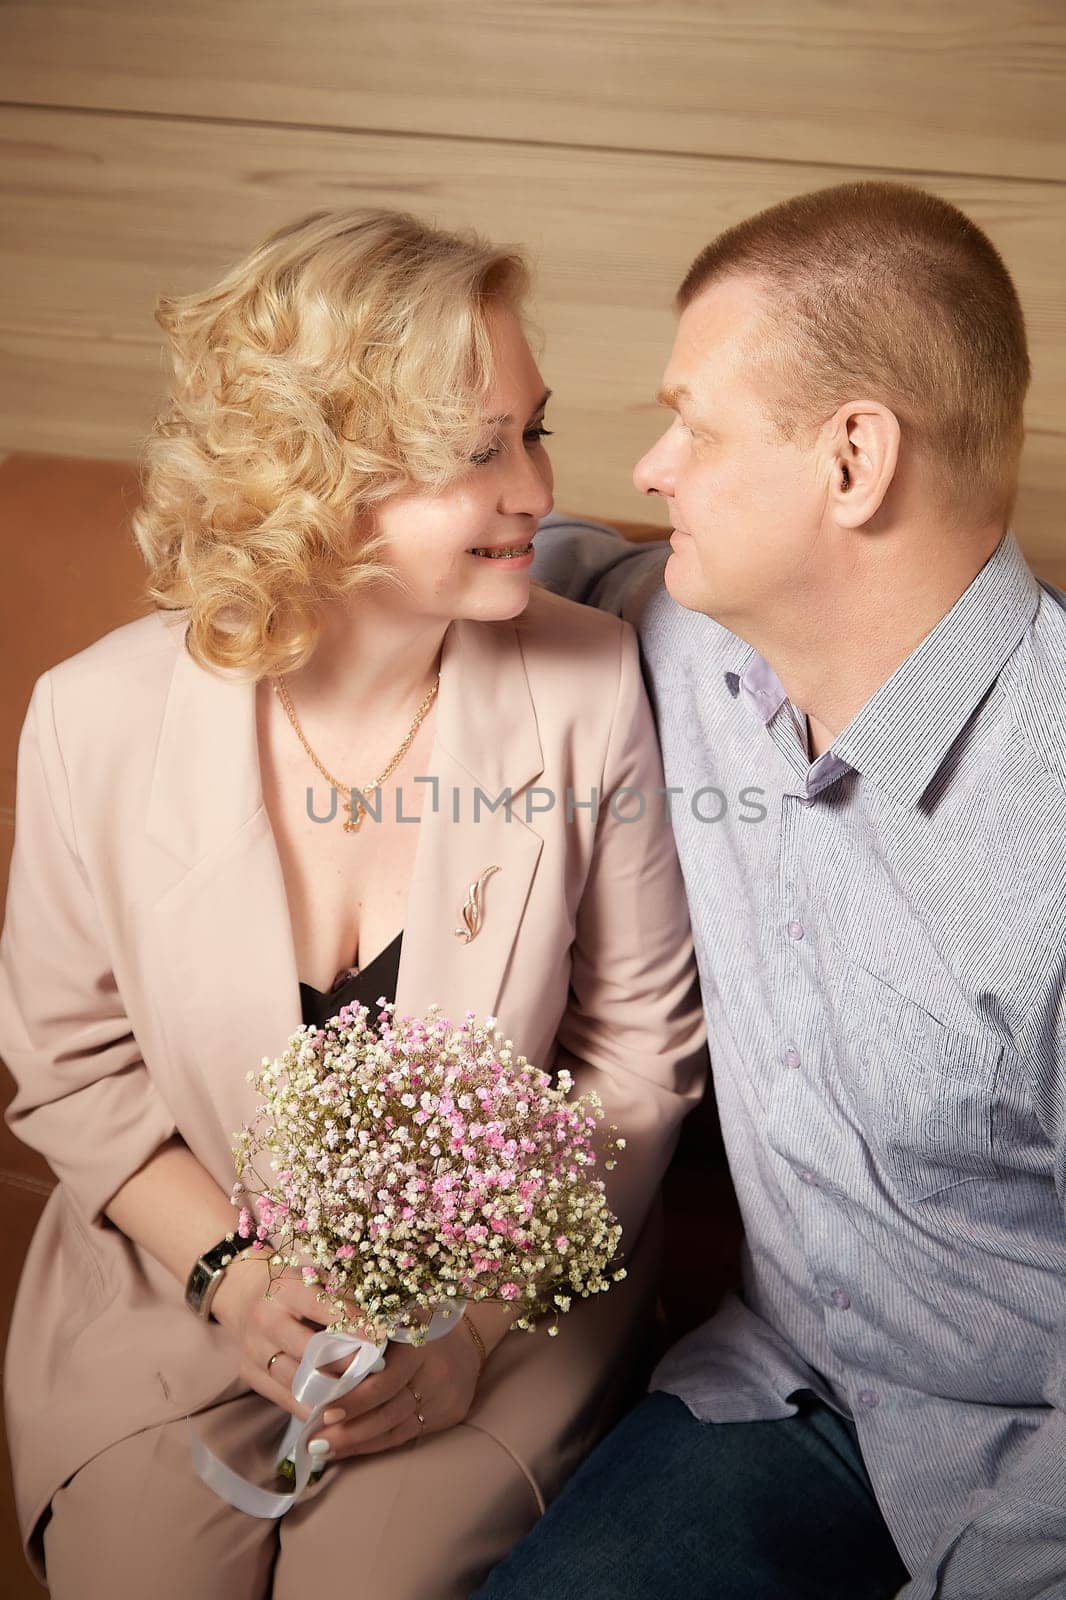 Loving adult couple communicates and embraces privately in the living room or in hotel. The woman is wearing business formal suit and man is wearing jeans and a shirt, indicating a close relationship by keleny